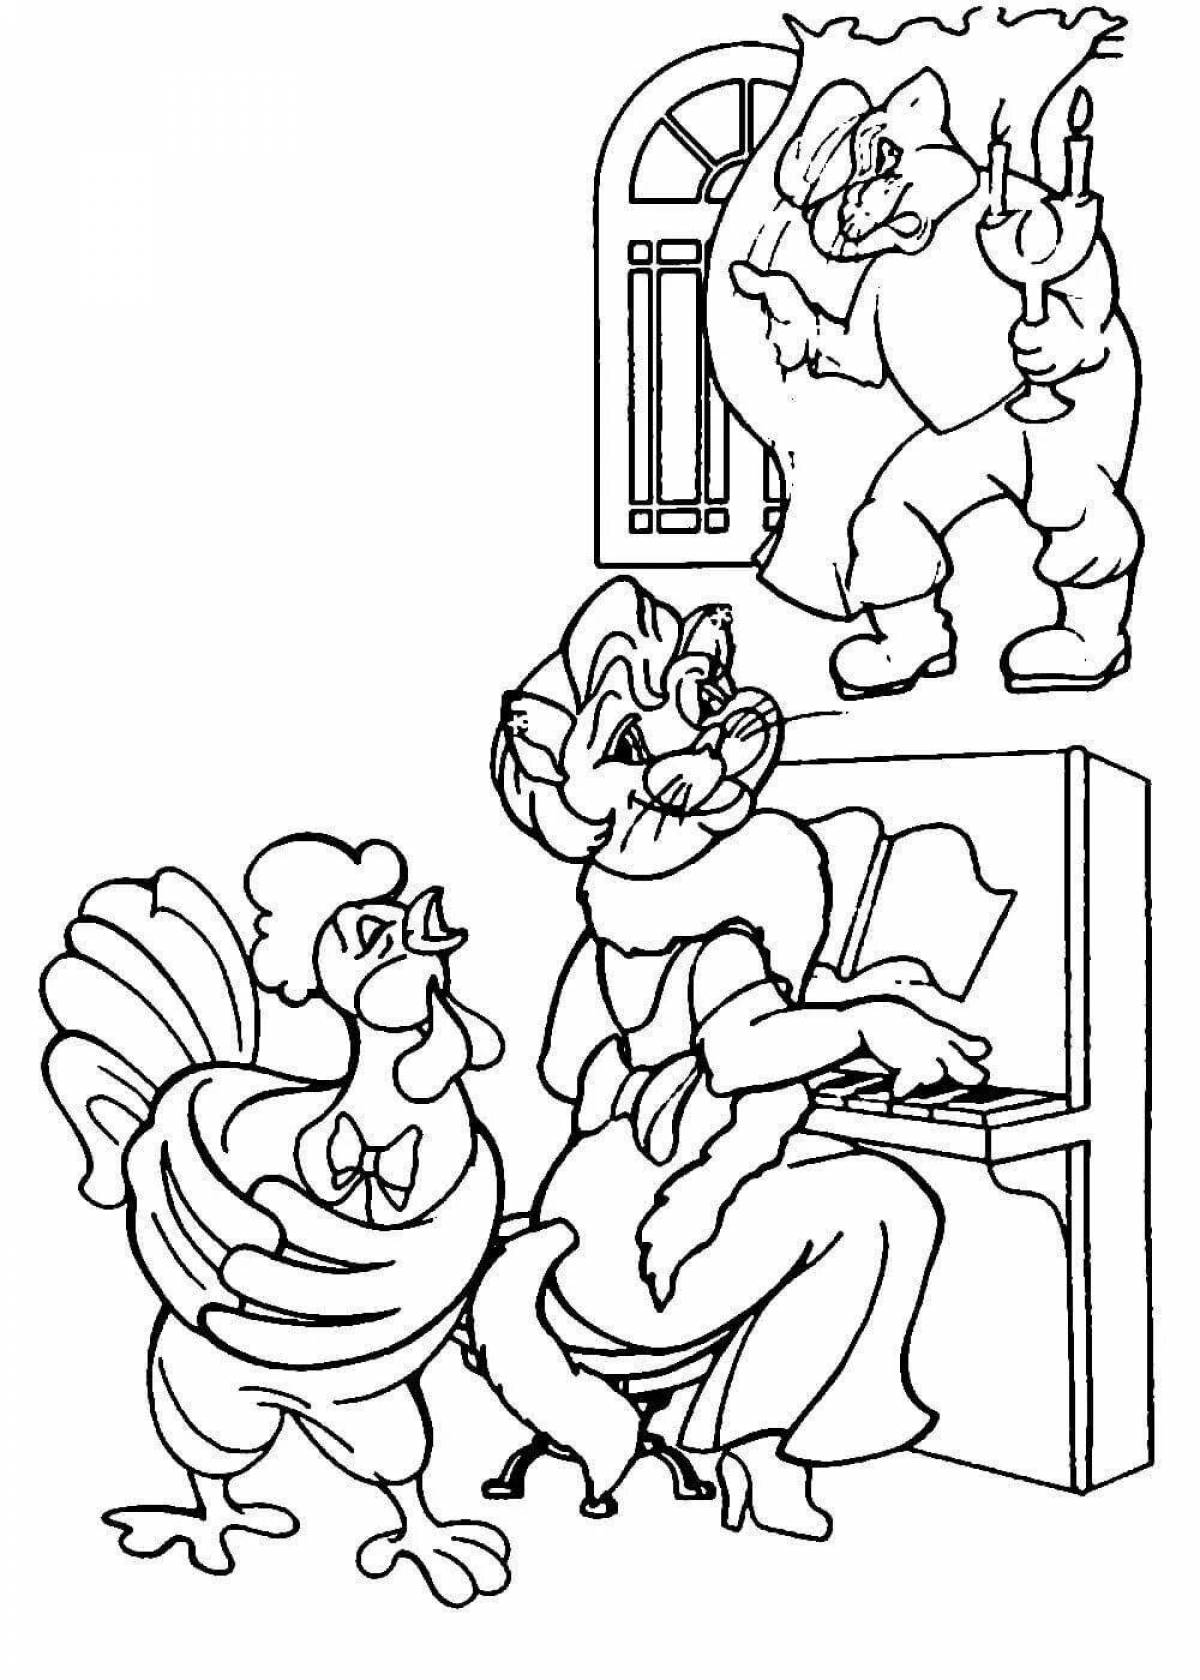 Flawless cat house coloring page for kids